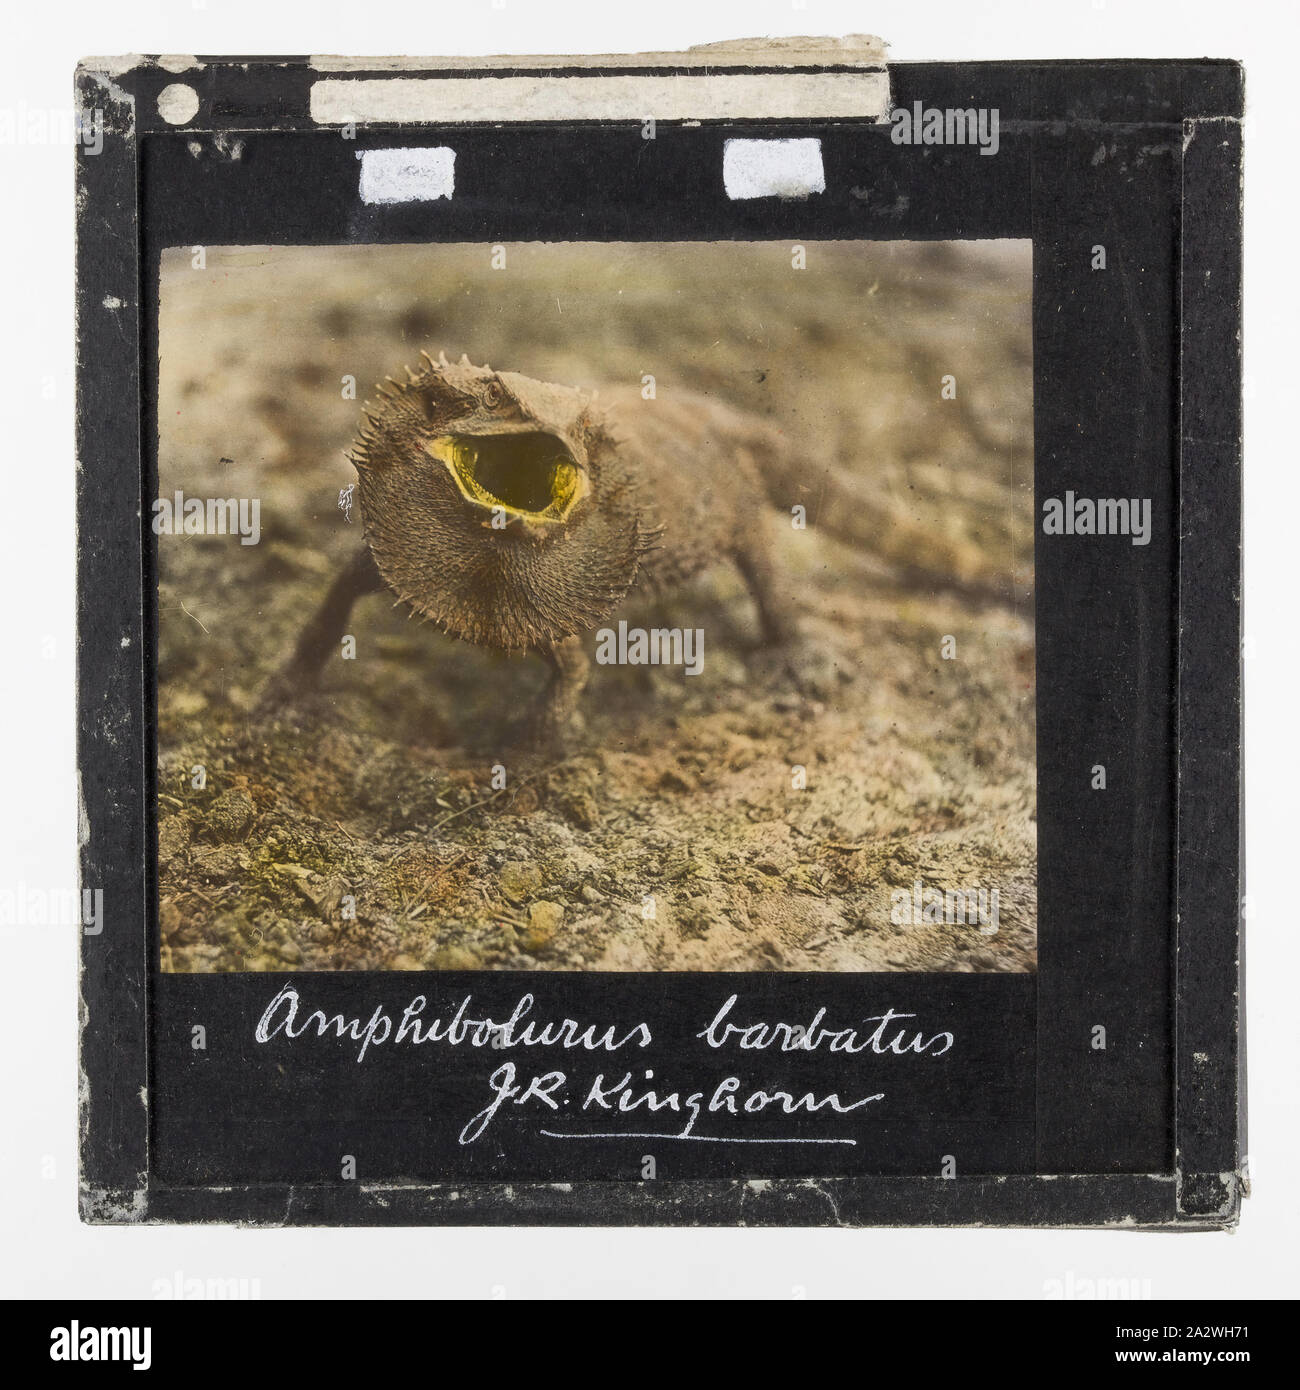 Lantern Slide - 'Amphibolurus Barbatus', 1920-1940, Coloured lantern slide depicting a bearded dragon ( Amphibolurus Barbatus). Image by J. R. Kinghorn, (1891-1983), zoologist, museum curator and broadcaster. Kinghorn was employed at the Australian Museum in Sydney between 1907-1956 Stock Photo